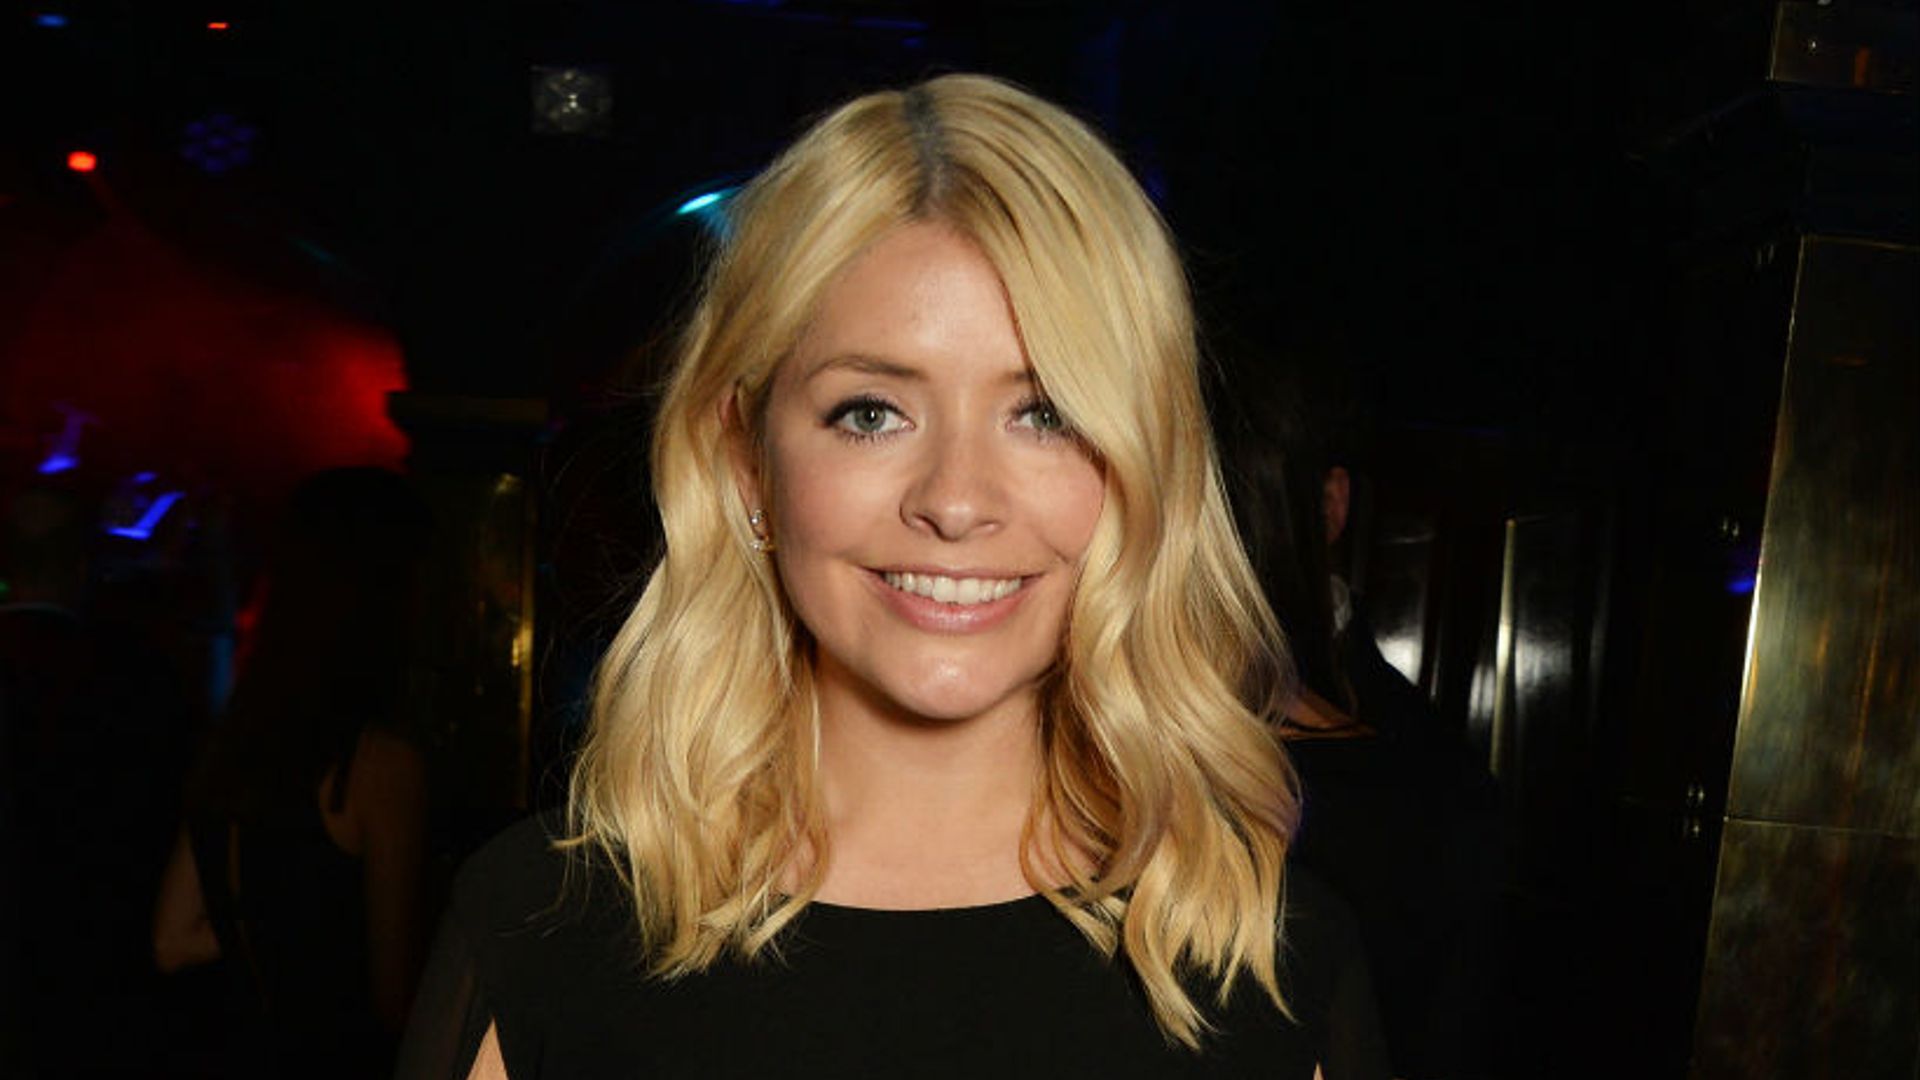 holly-willoughby-dress